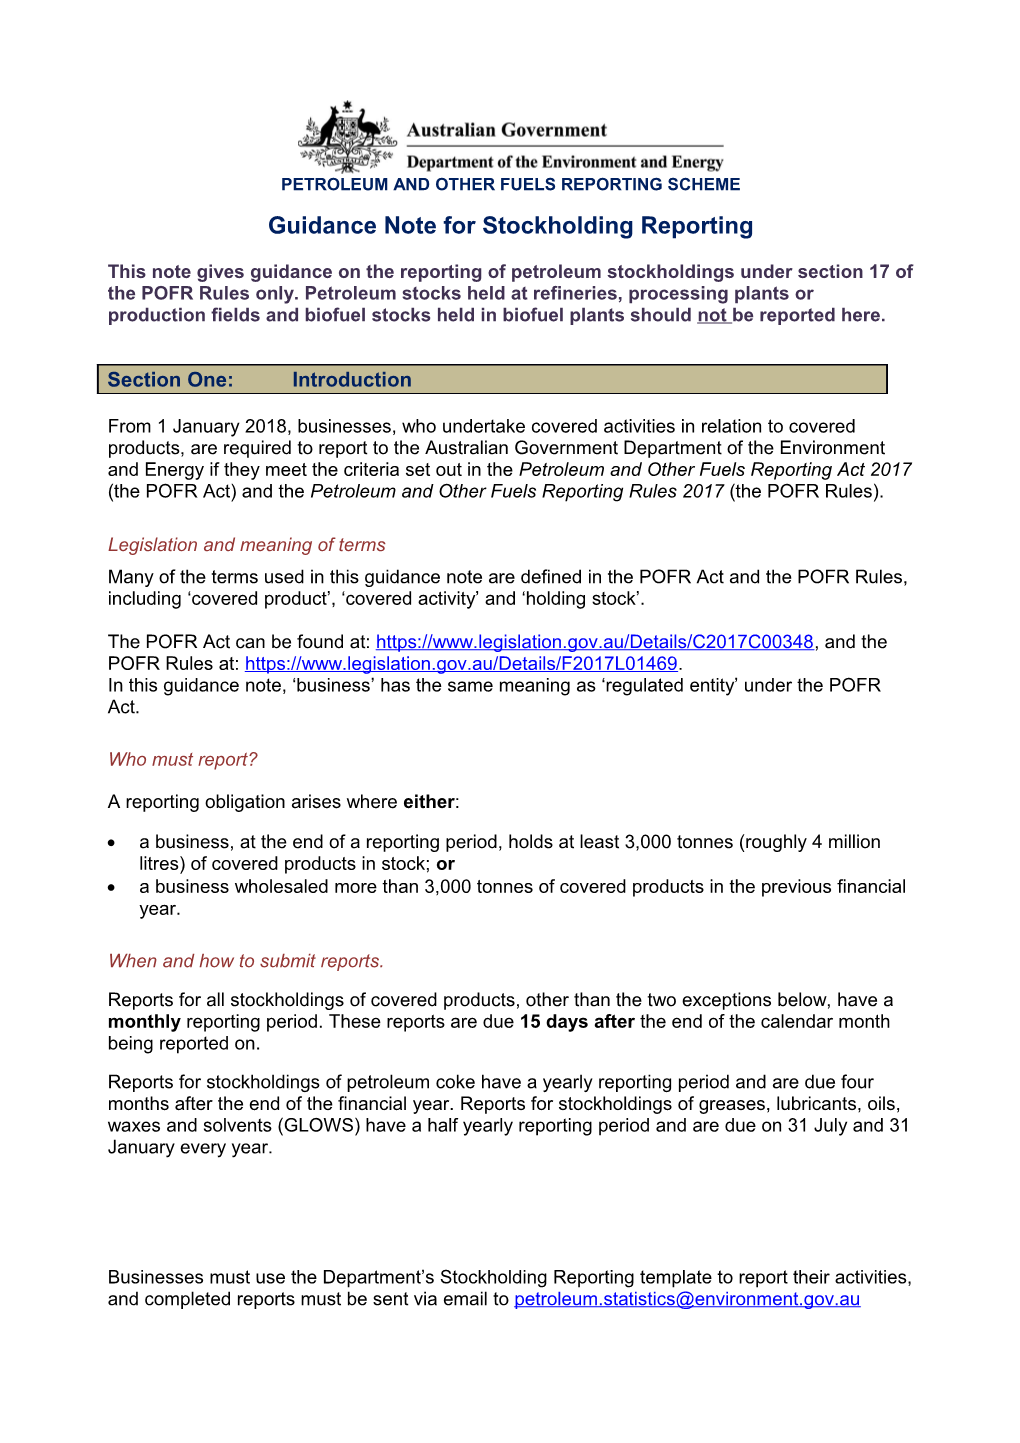 Stockholding Guidance Note